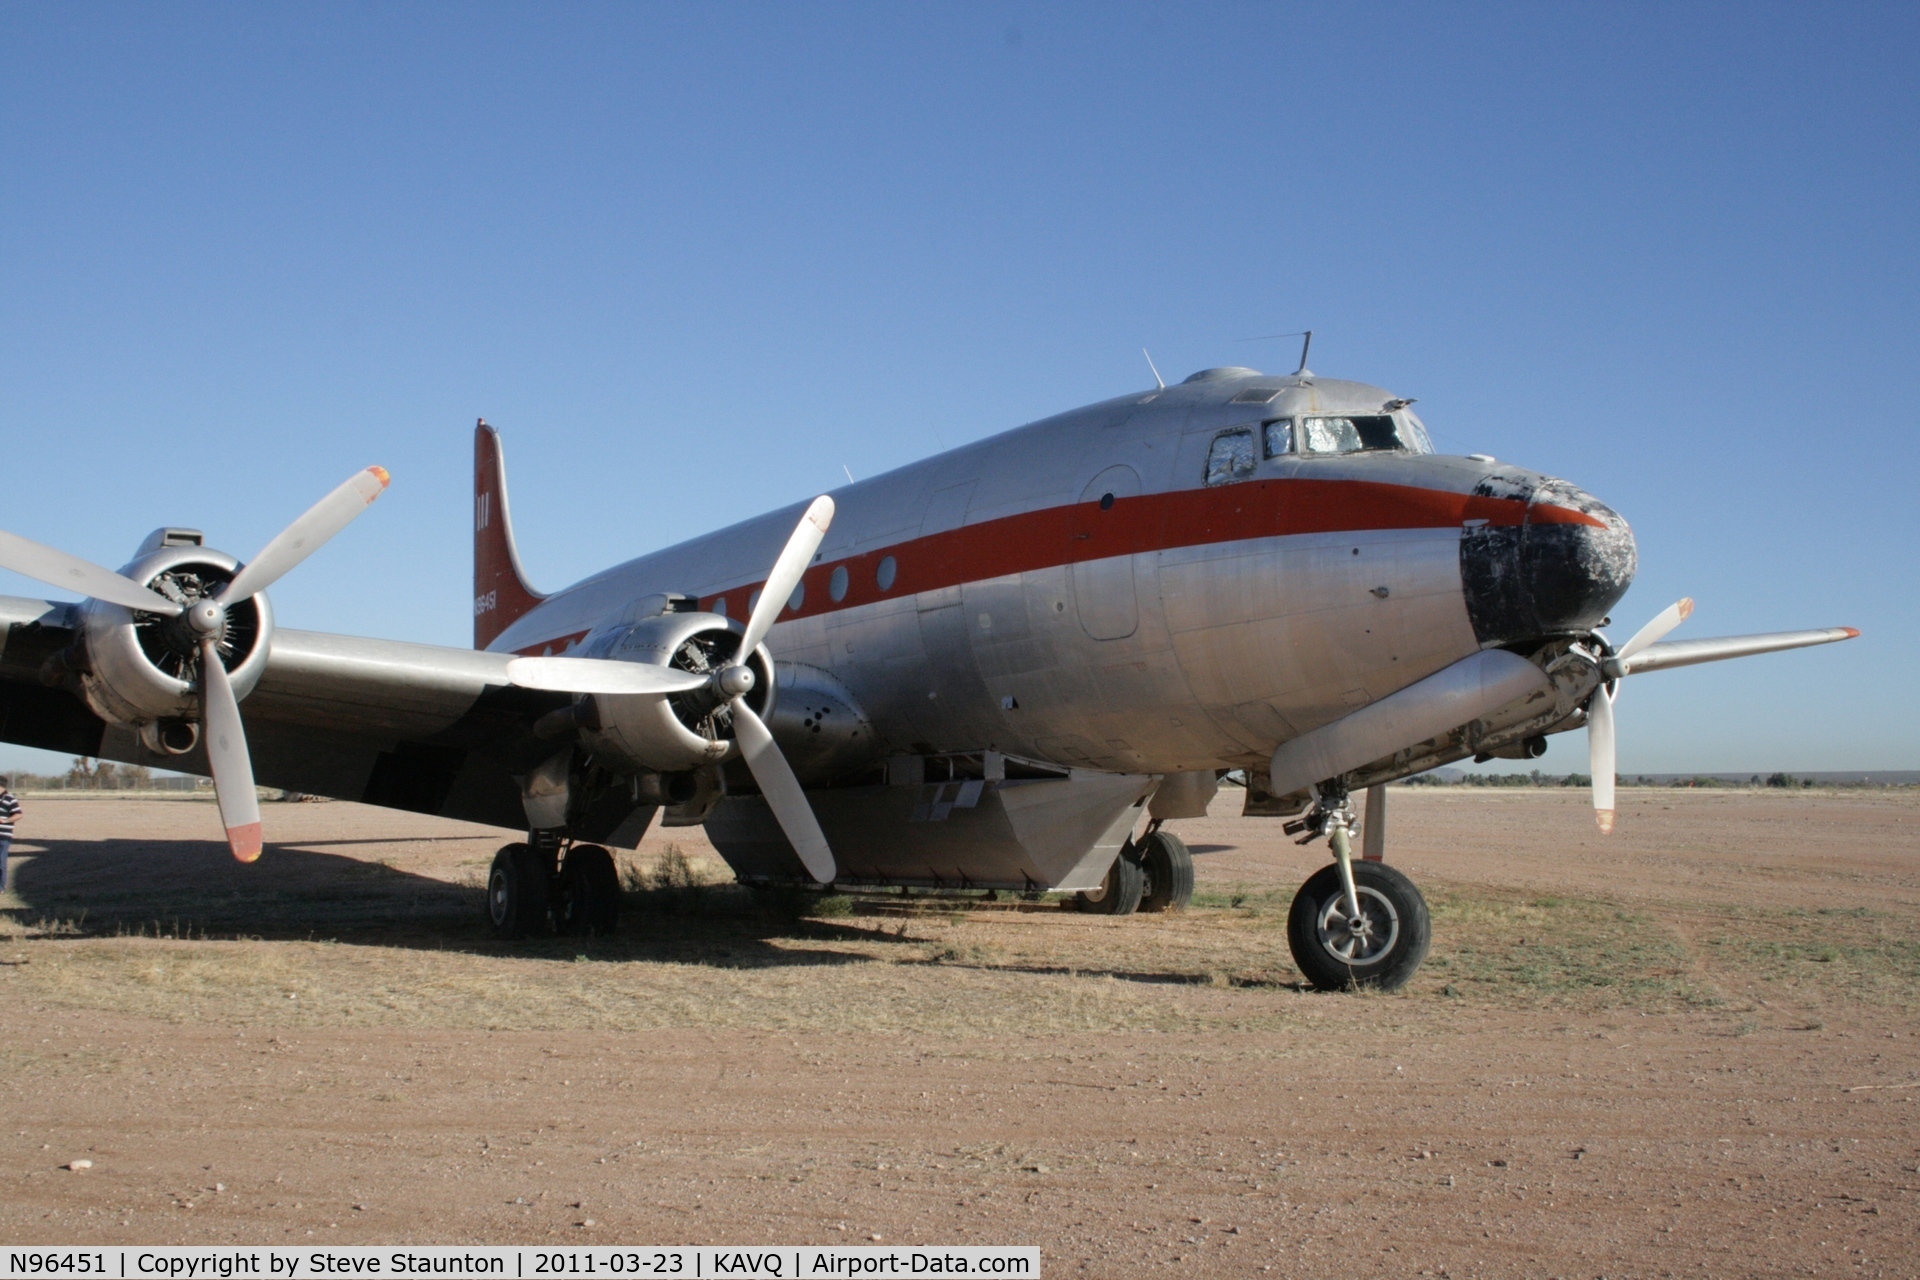 N96451, 1945 Douglas C-54S Skymaster (DC-4) C/N 10592/323, Taken at Avra Valley Airport, in March 2011 whilst on an Aeroprint Aviation tour